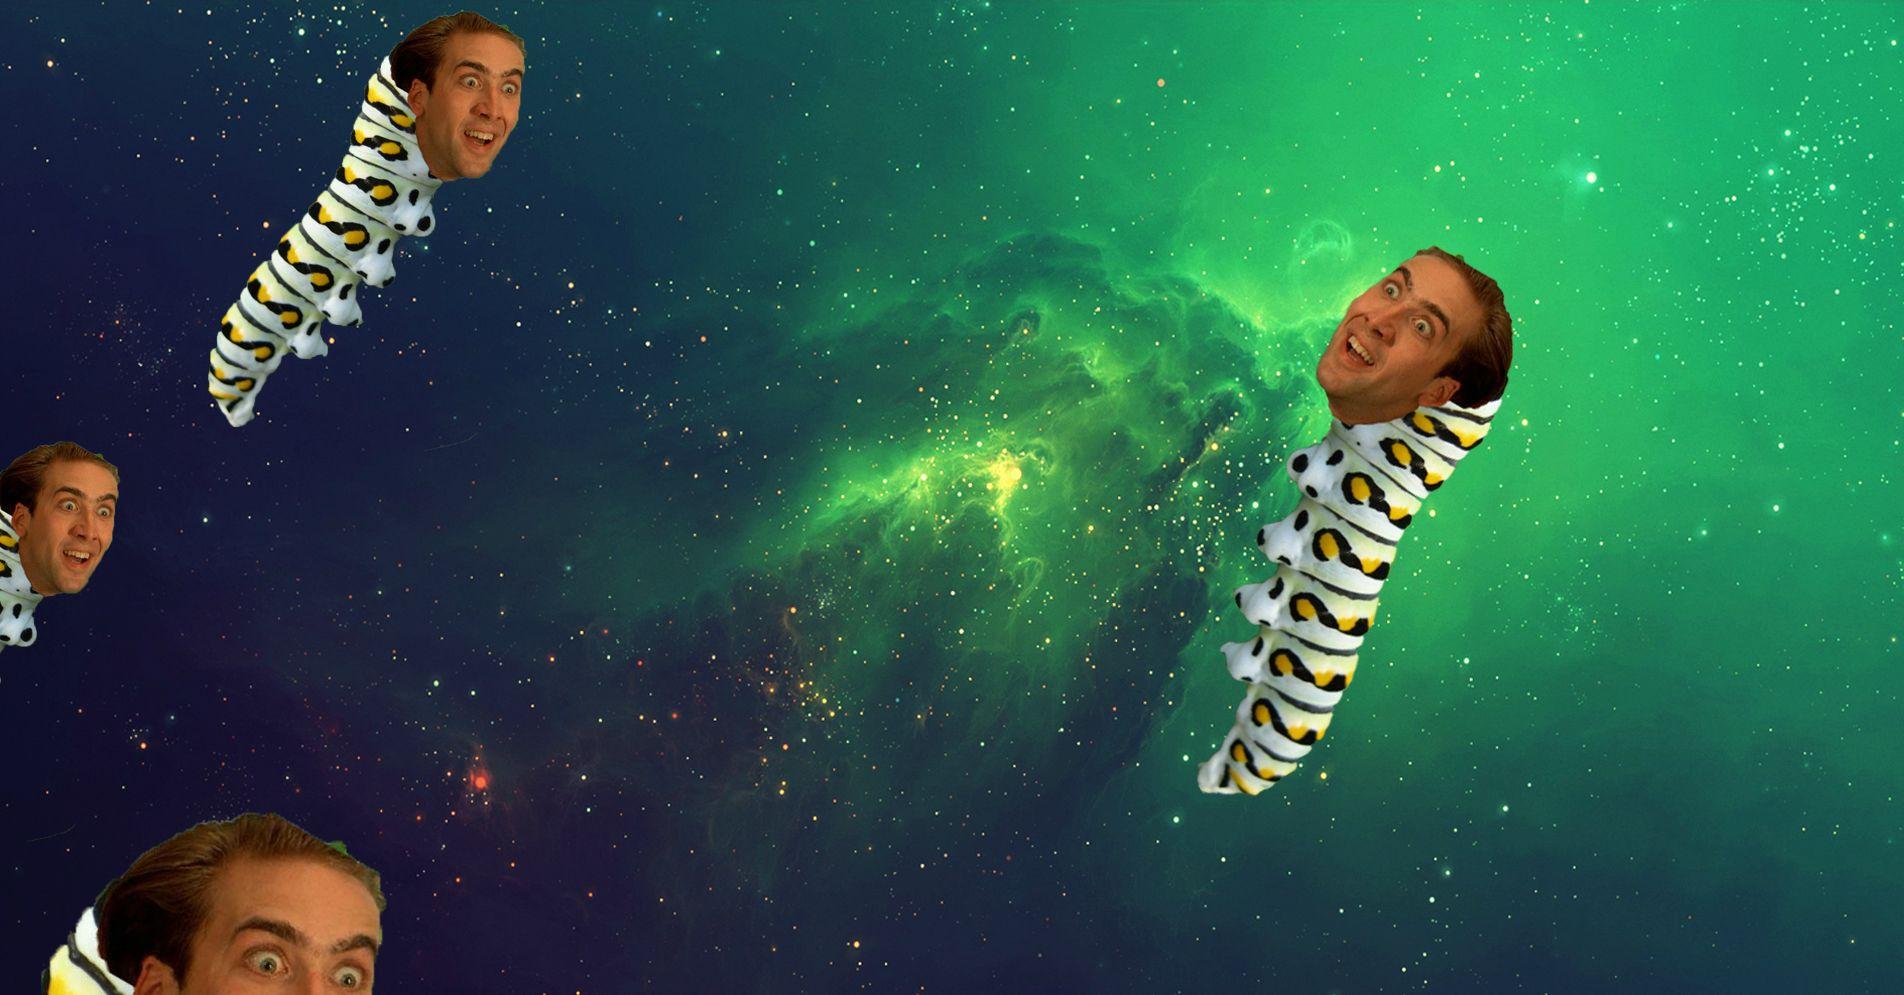 I like space, caterpillars, and Nicolas Cage